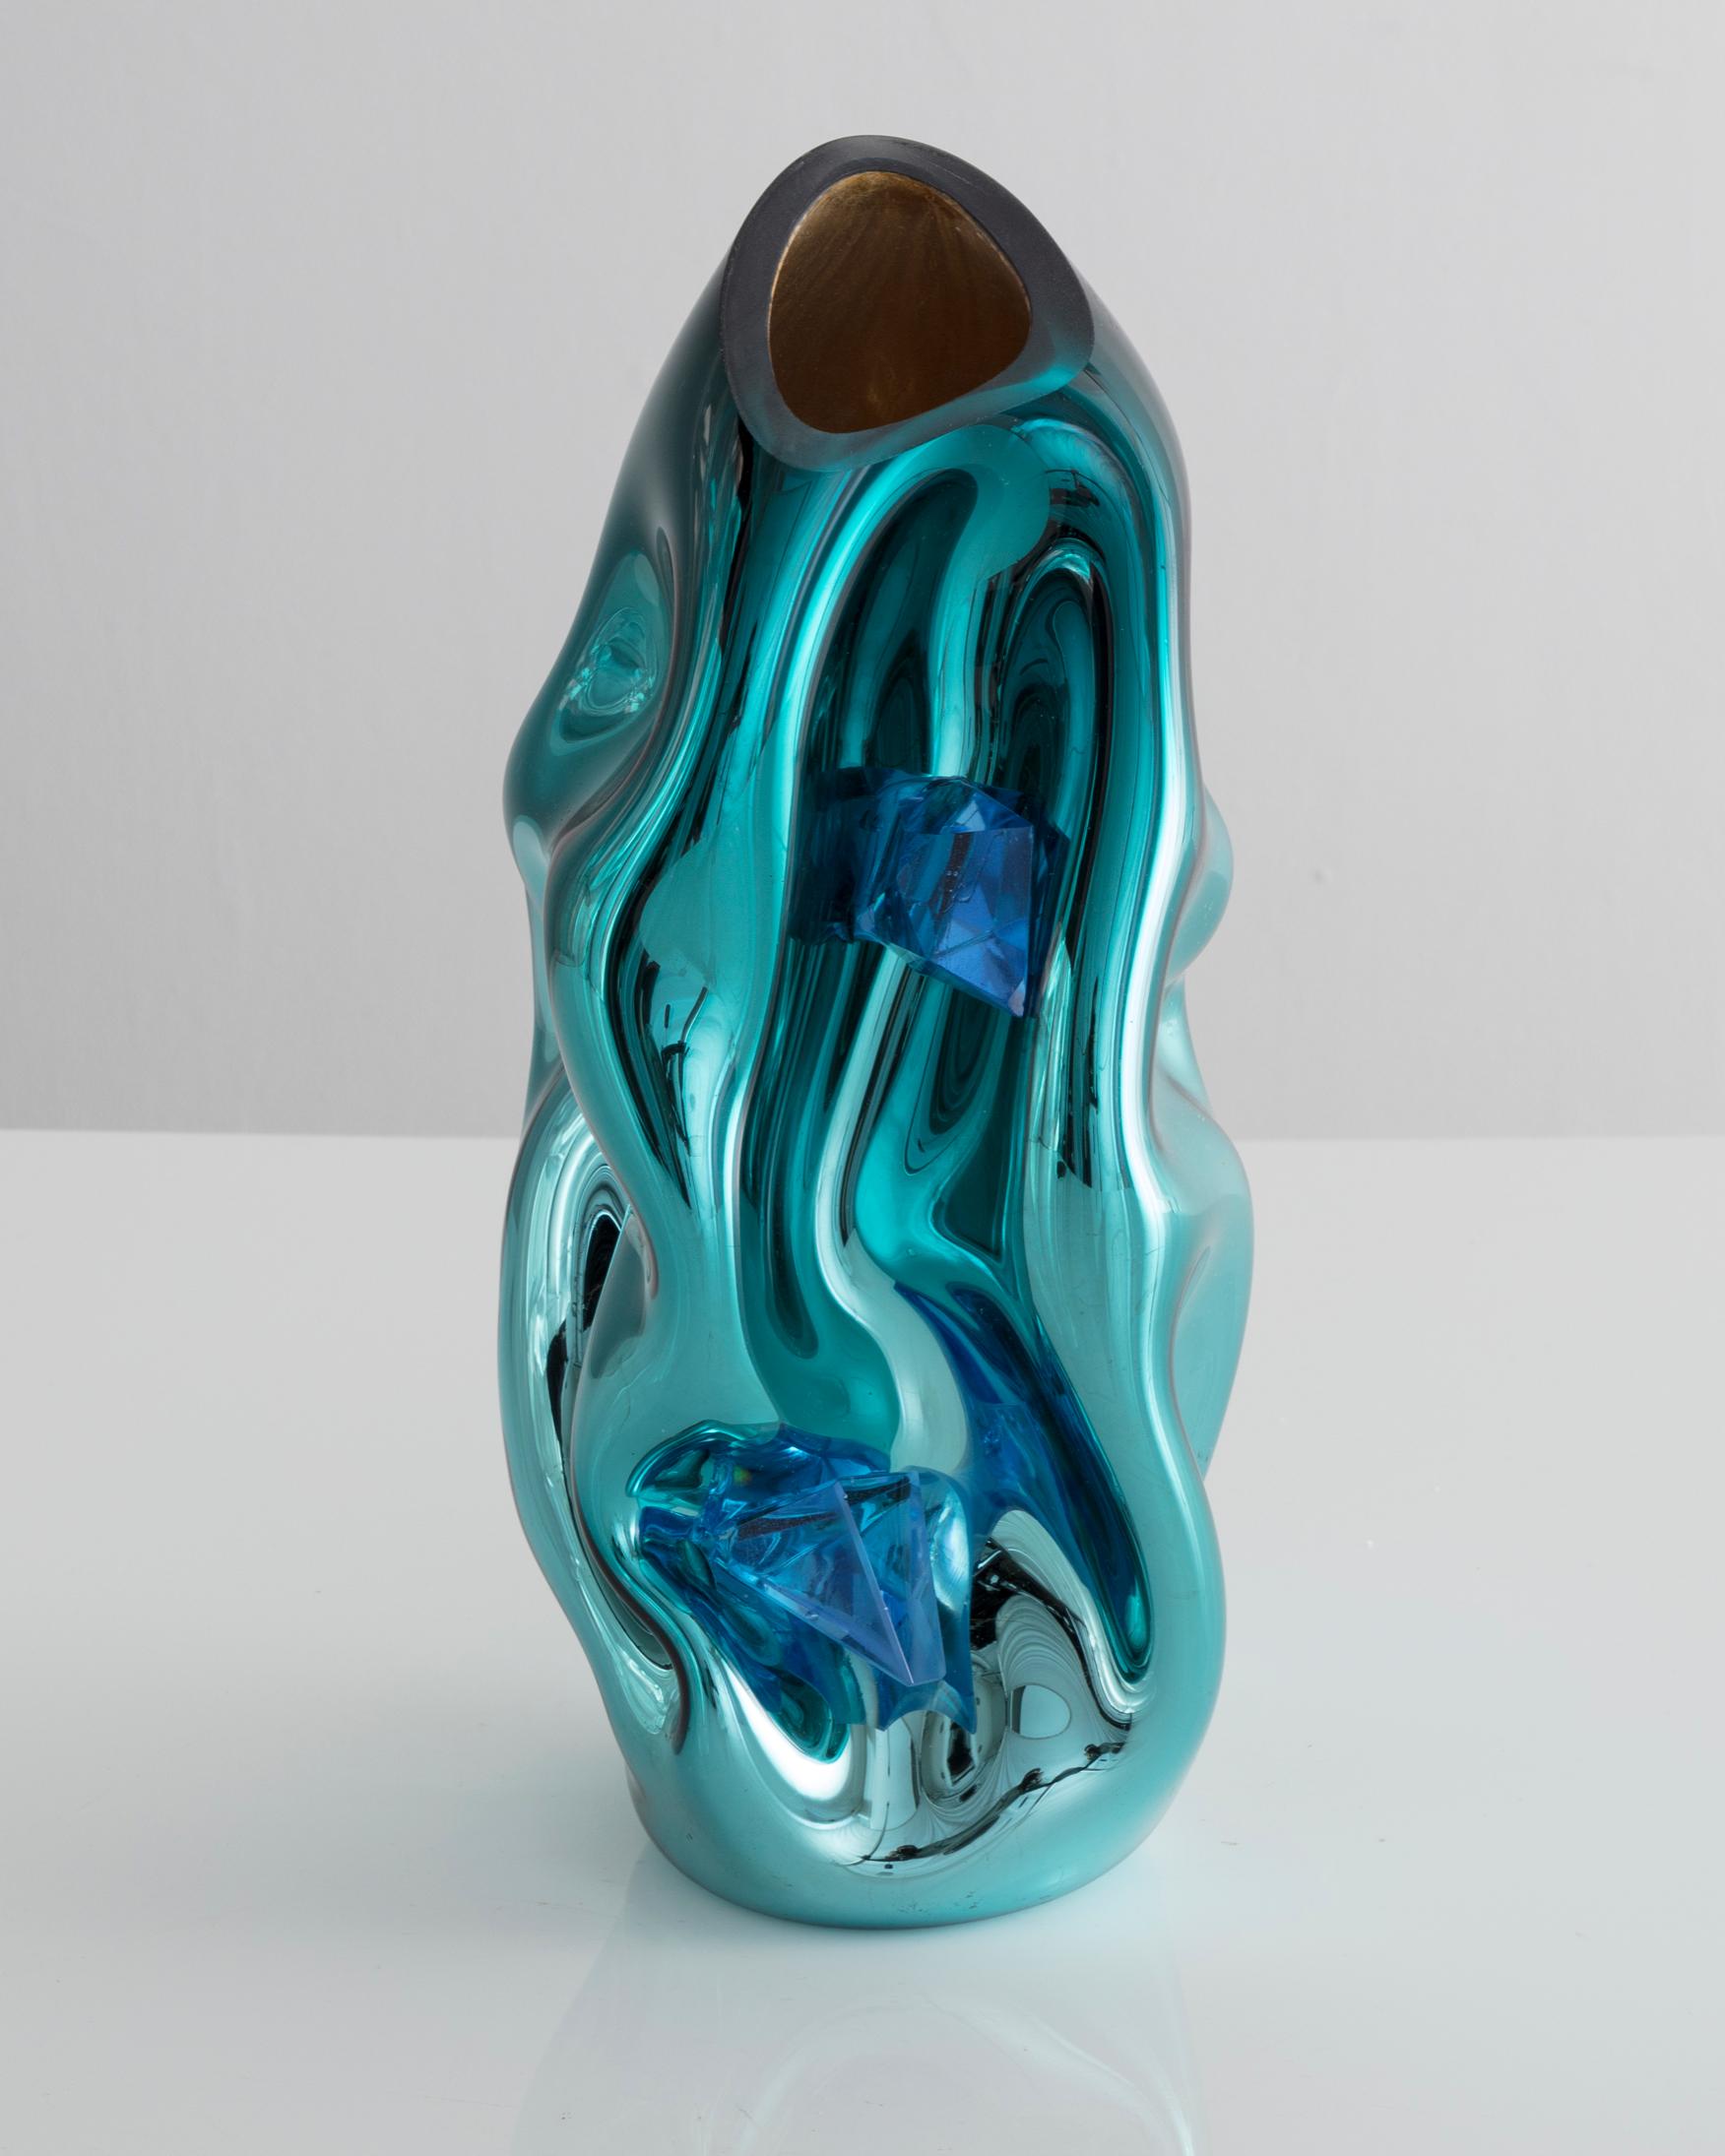 Unique petite crumpled sculptural vessel in silver and turquoise mirrorized hand blown glass with applied glass crystal. Designed and made by Jeff Zimmerman, USA, 2017.

Limited number available. Please note that each item may differ slightly in